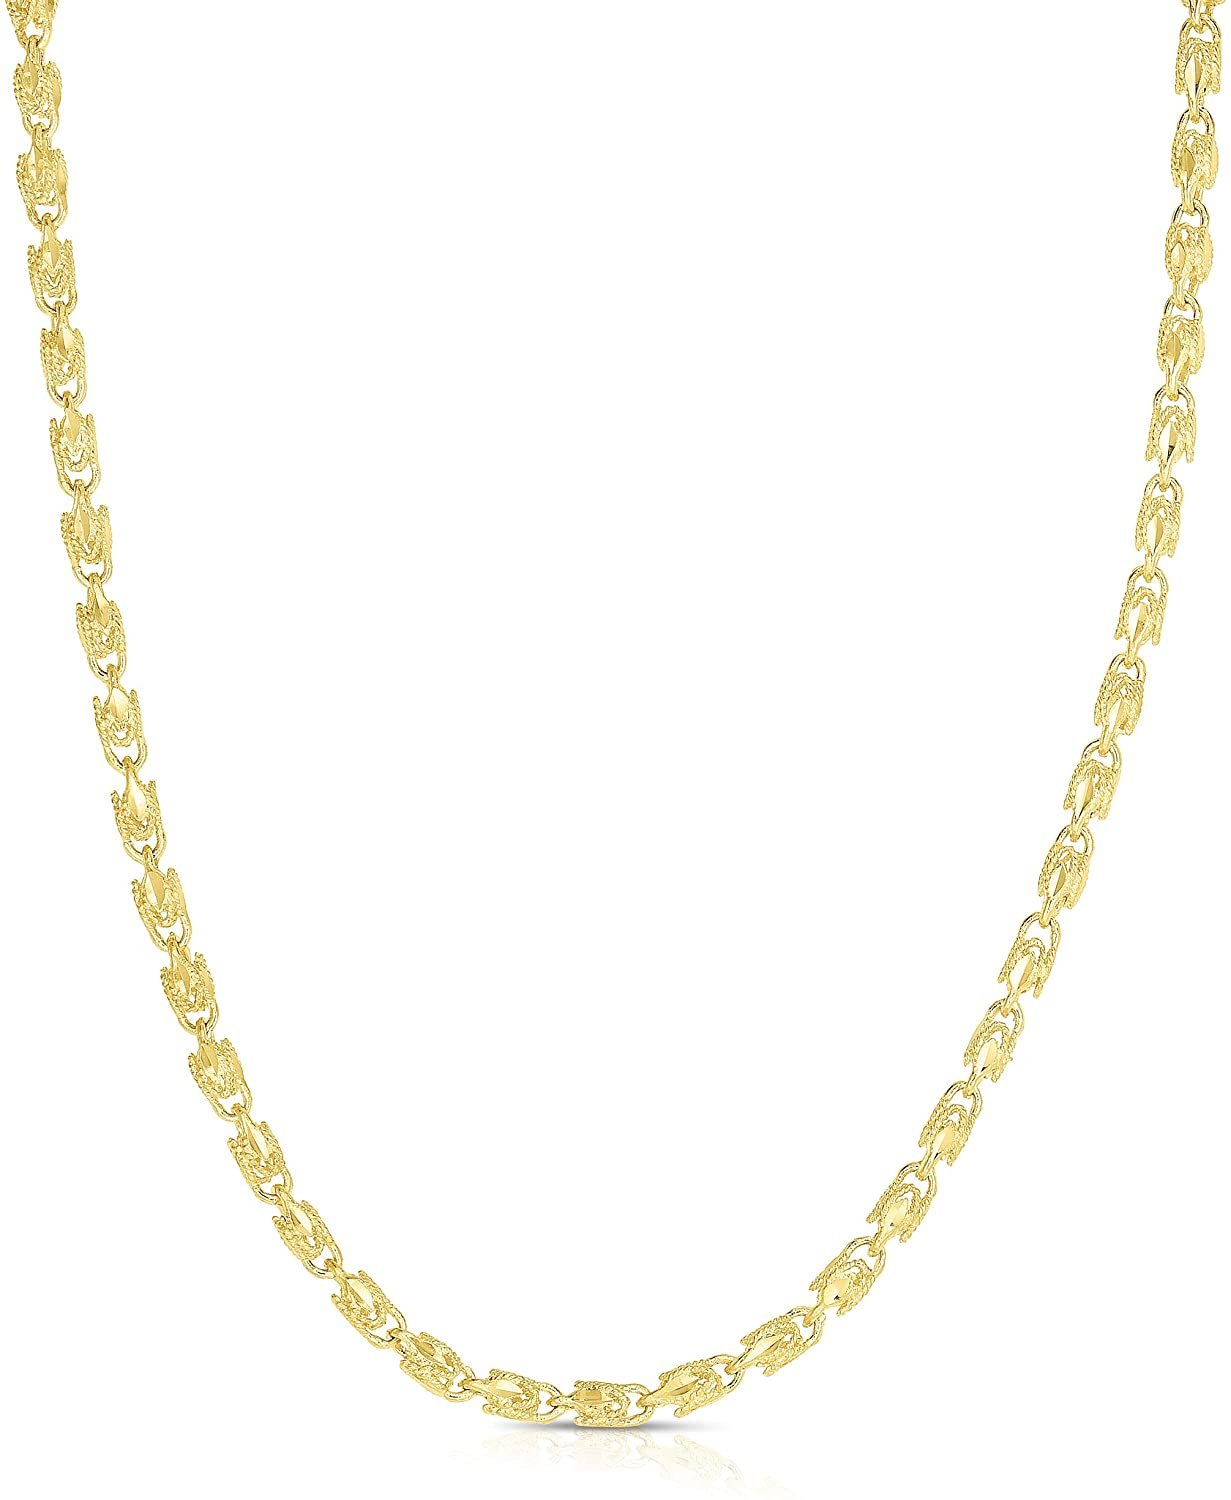 10k Yellow Gold 3mm Solid Turkish Rope Chain Necklace